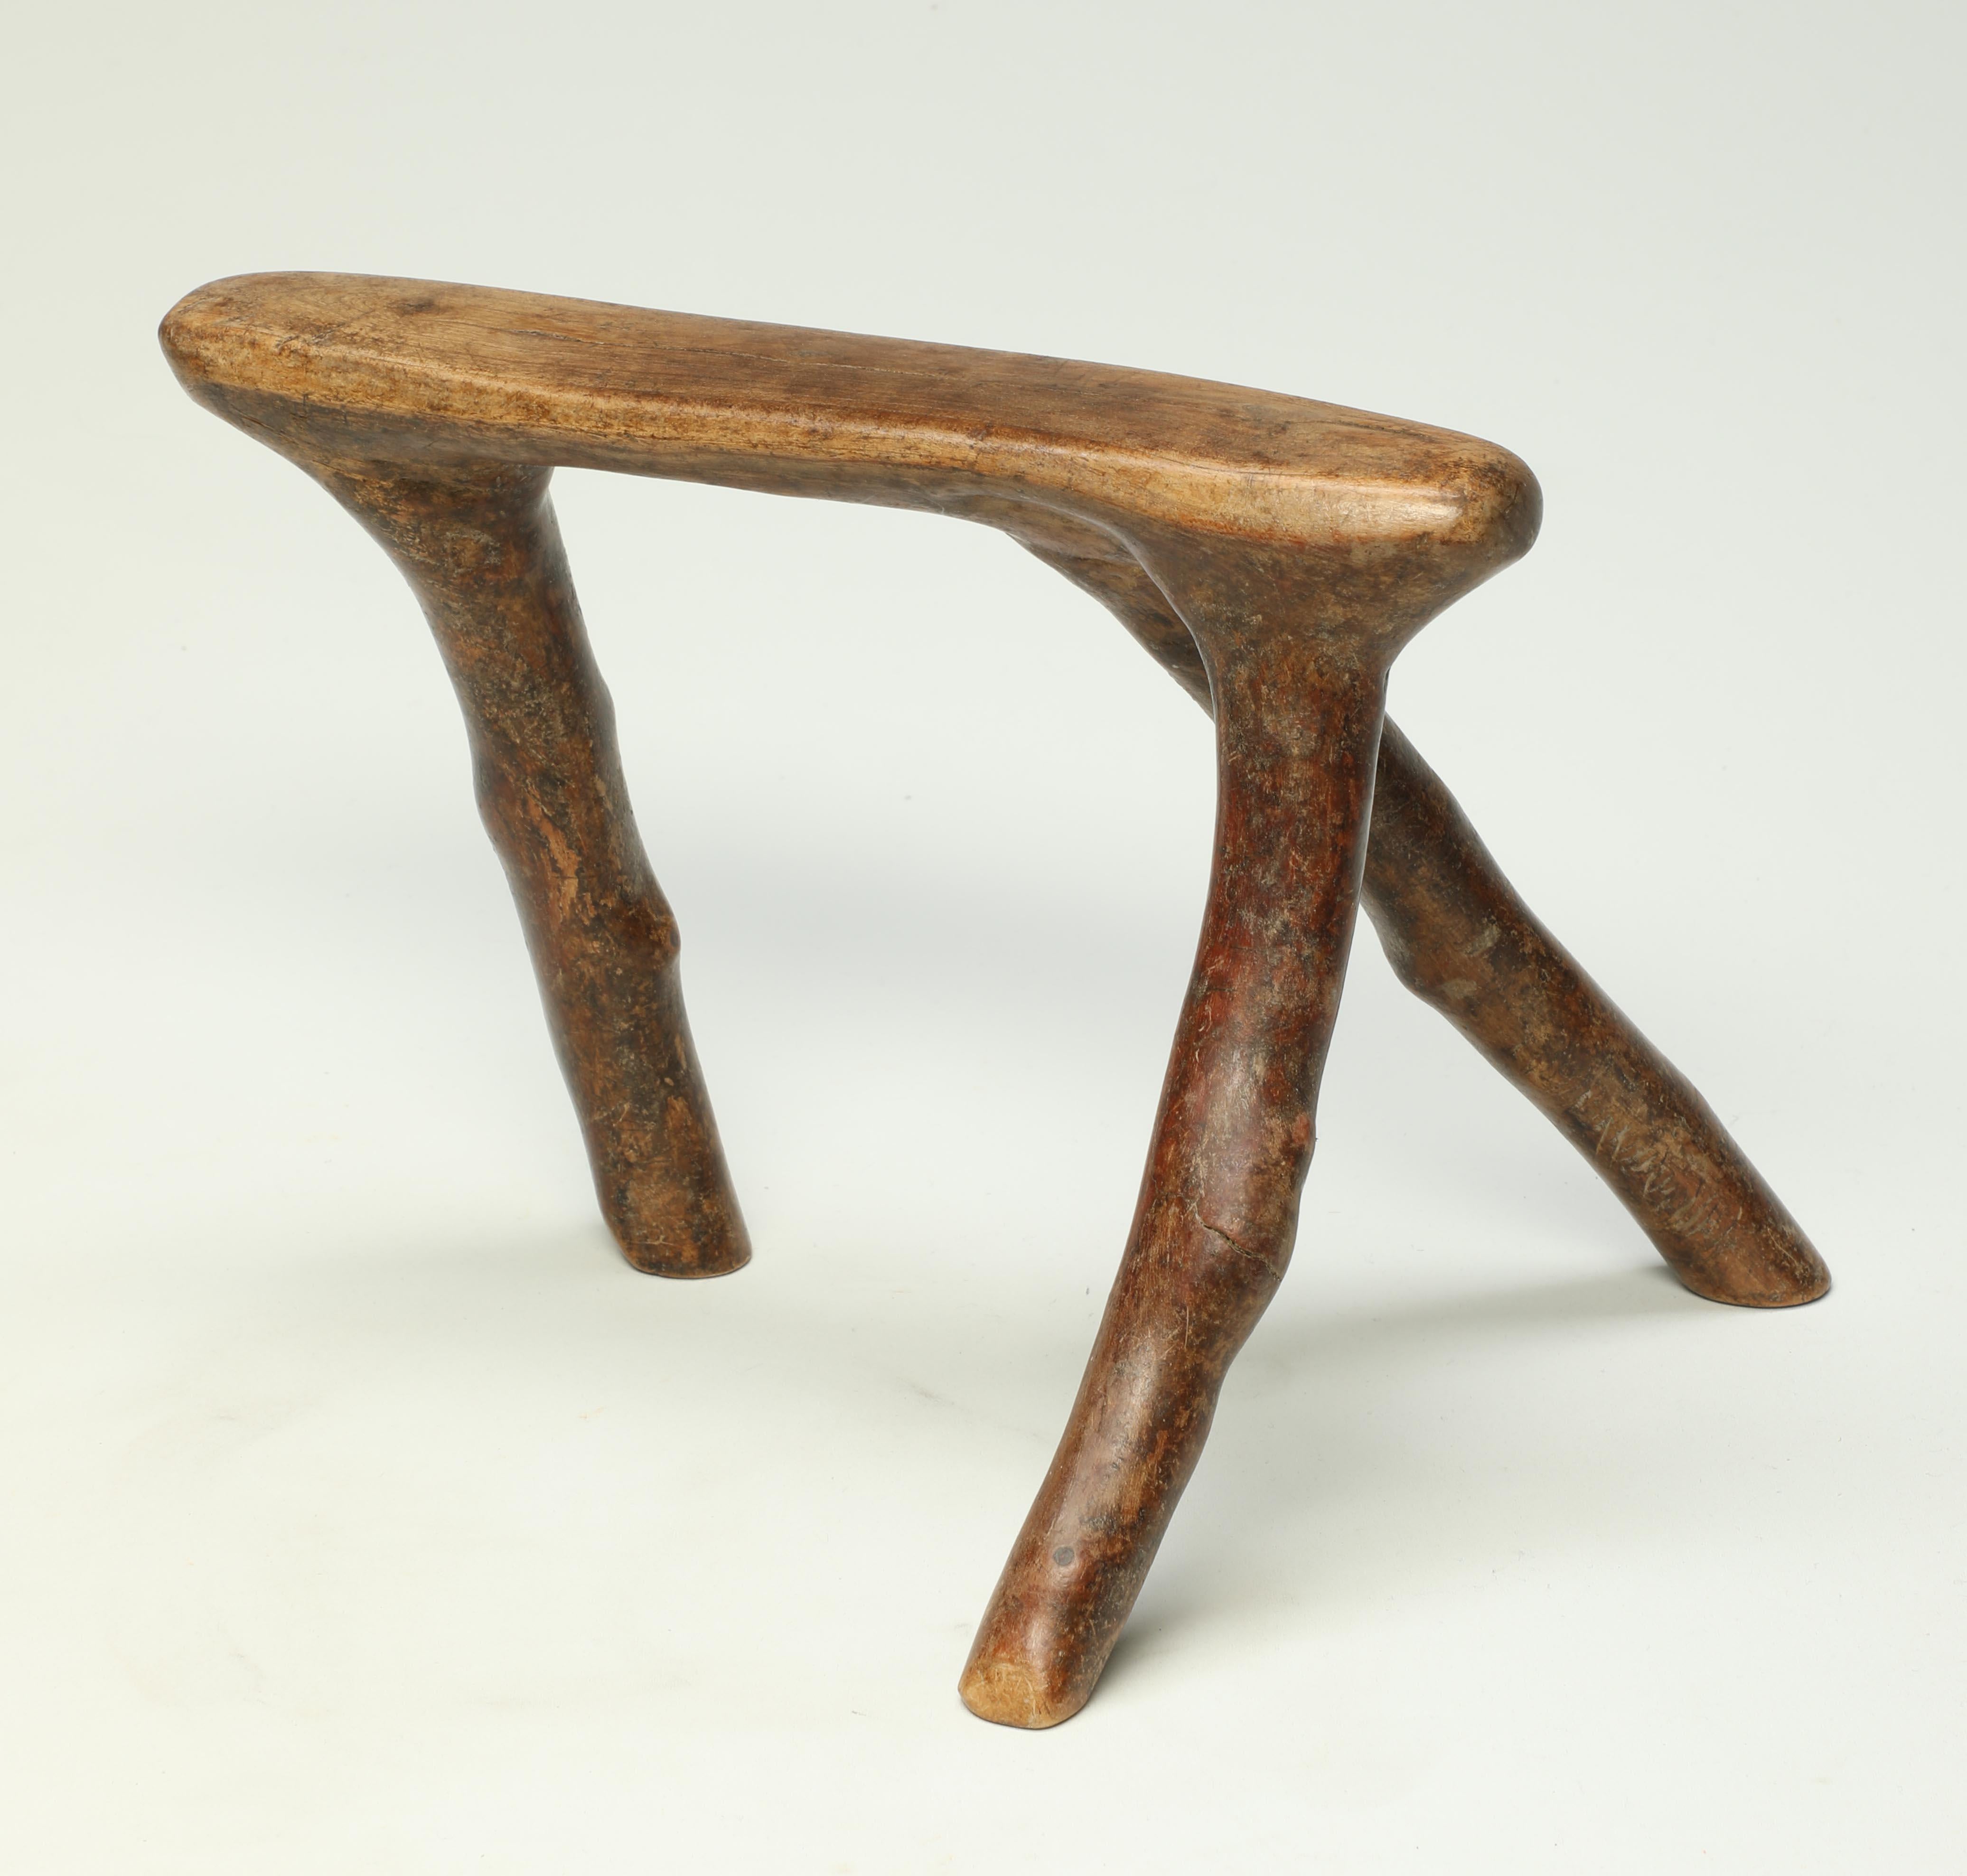 Hand-Carved Kenya Tribal Wood Headrest, Stylized Natural Animal Form, African Old and Worn For Sale